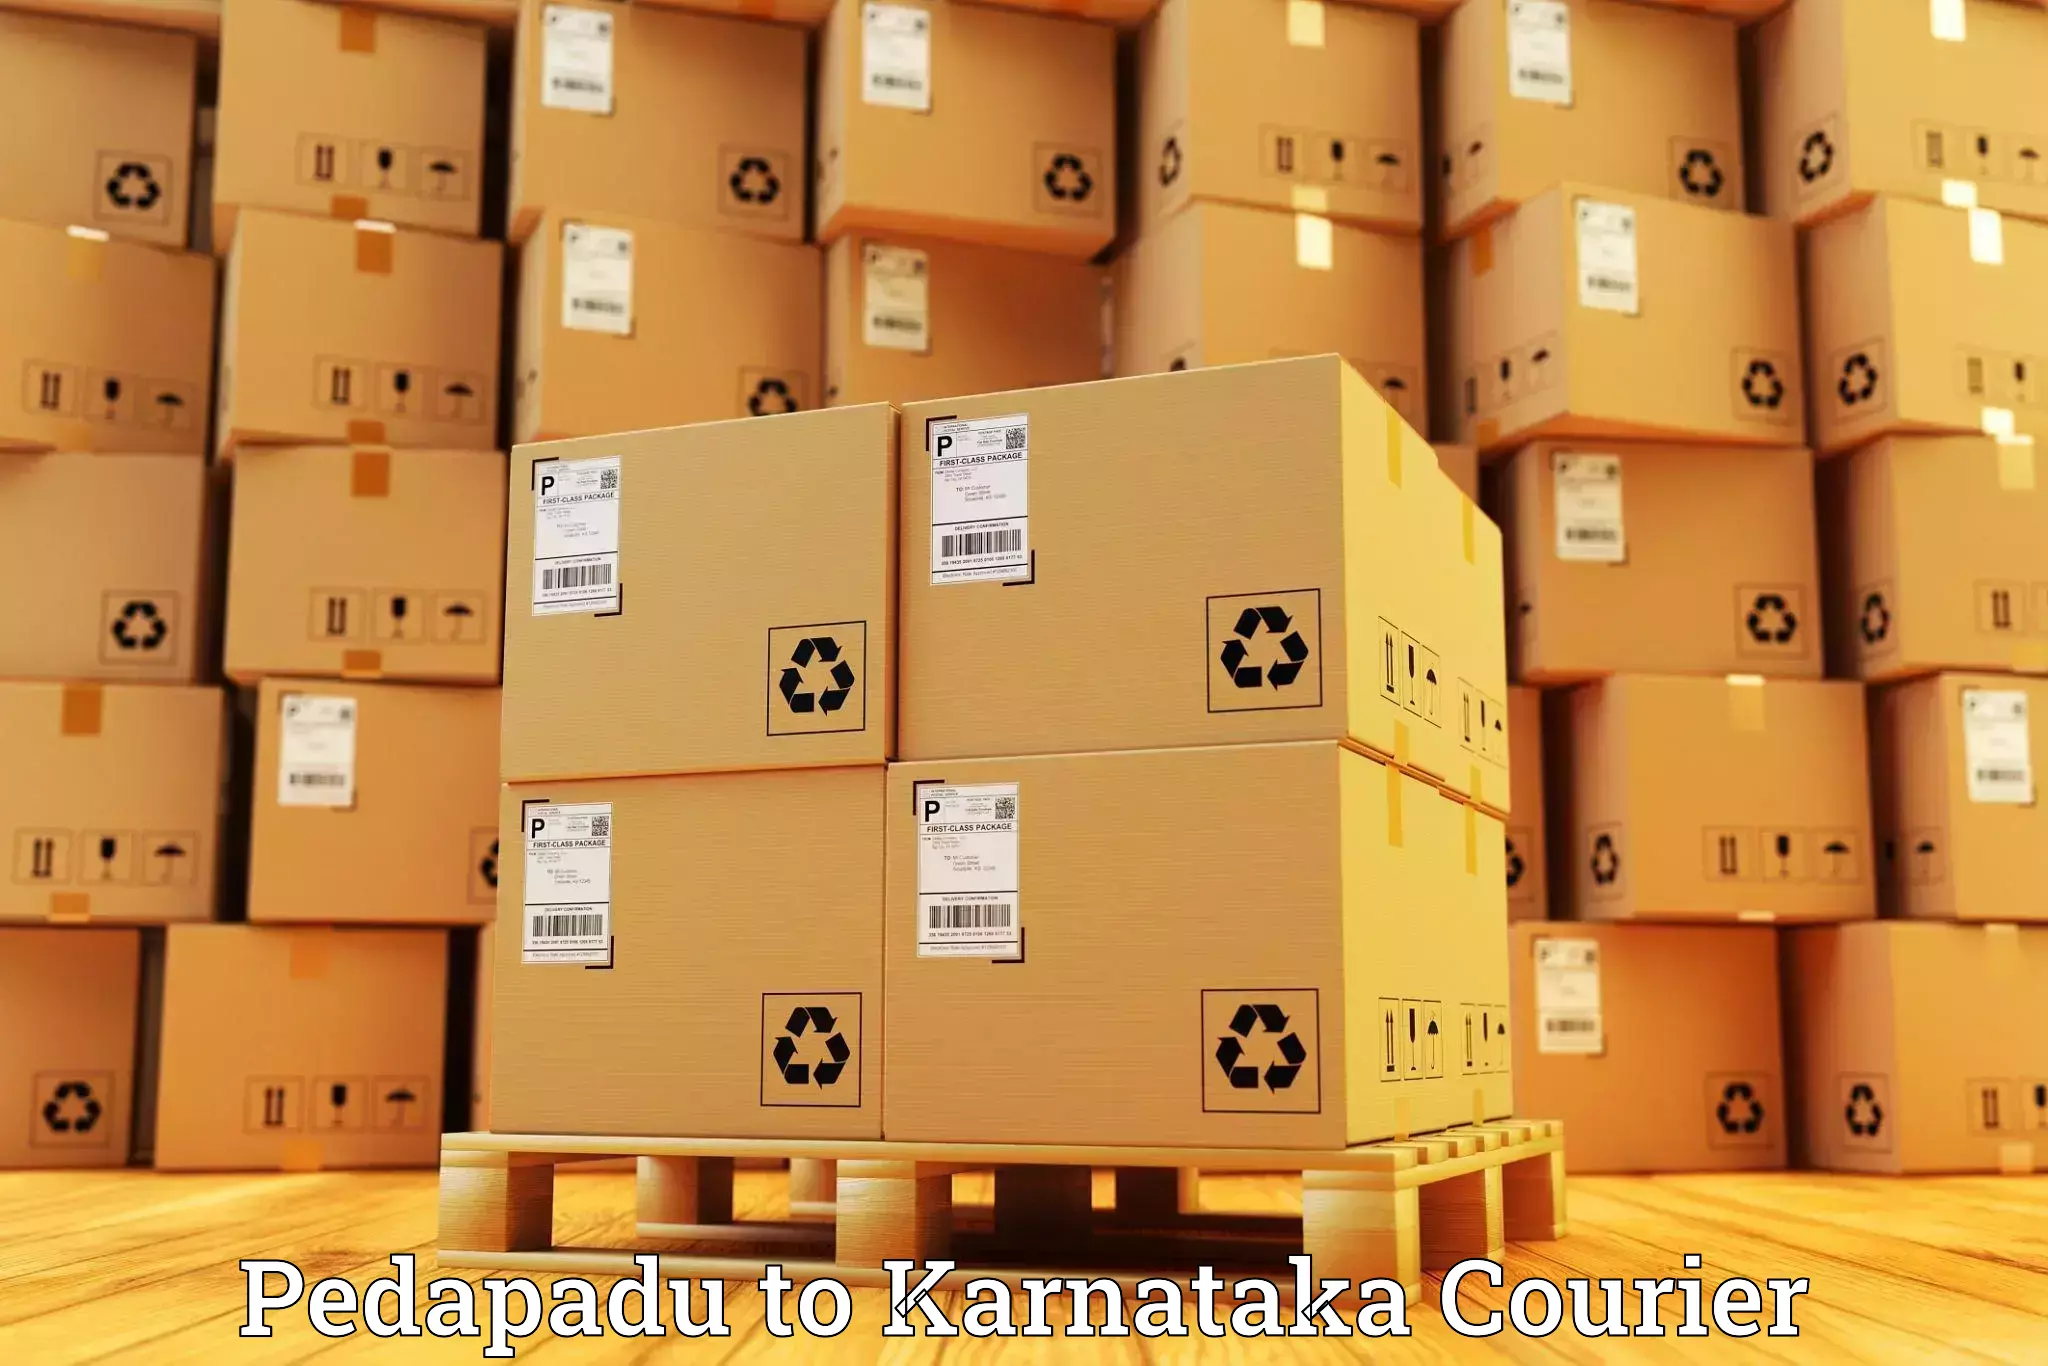 24-hour courier service in Pedapadu to Bantwal